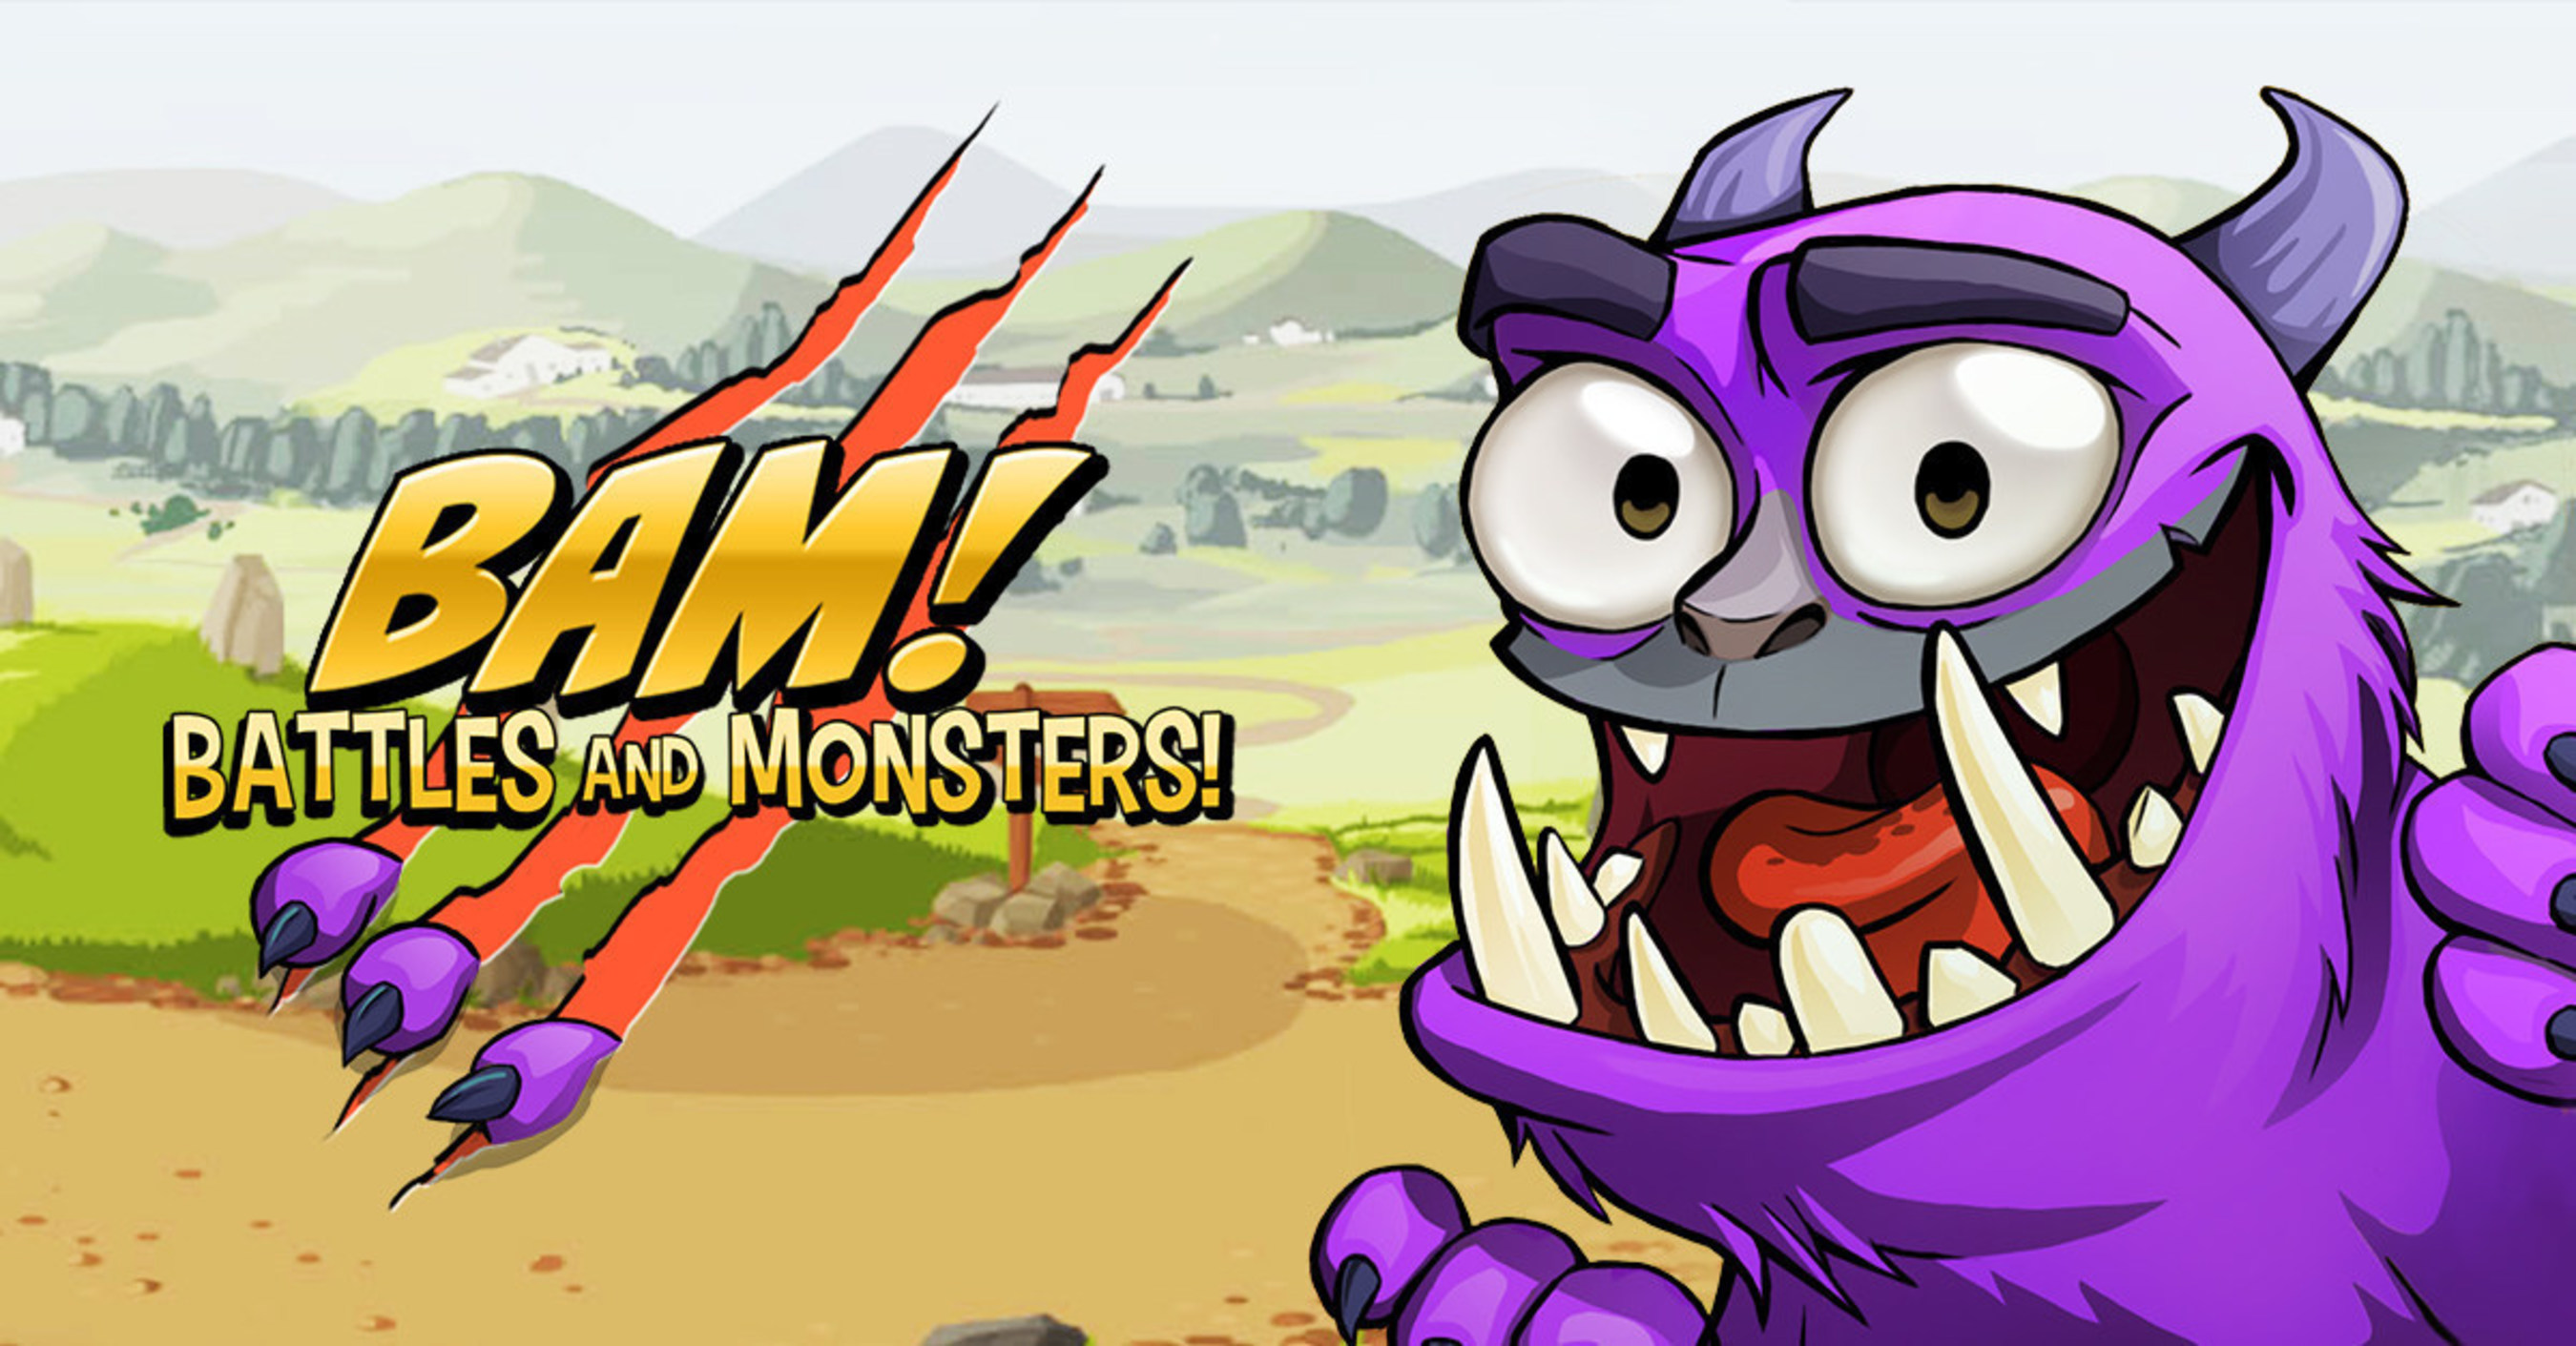 BAM! Battles and Monsters! Now available on iPhone and Android.